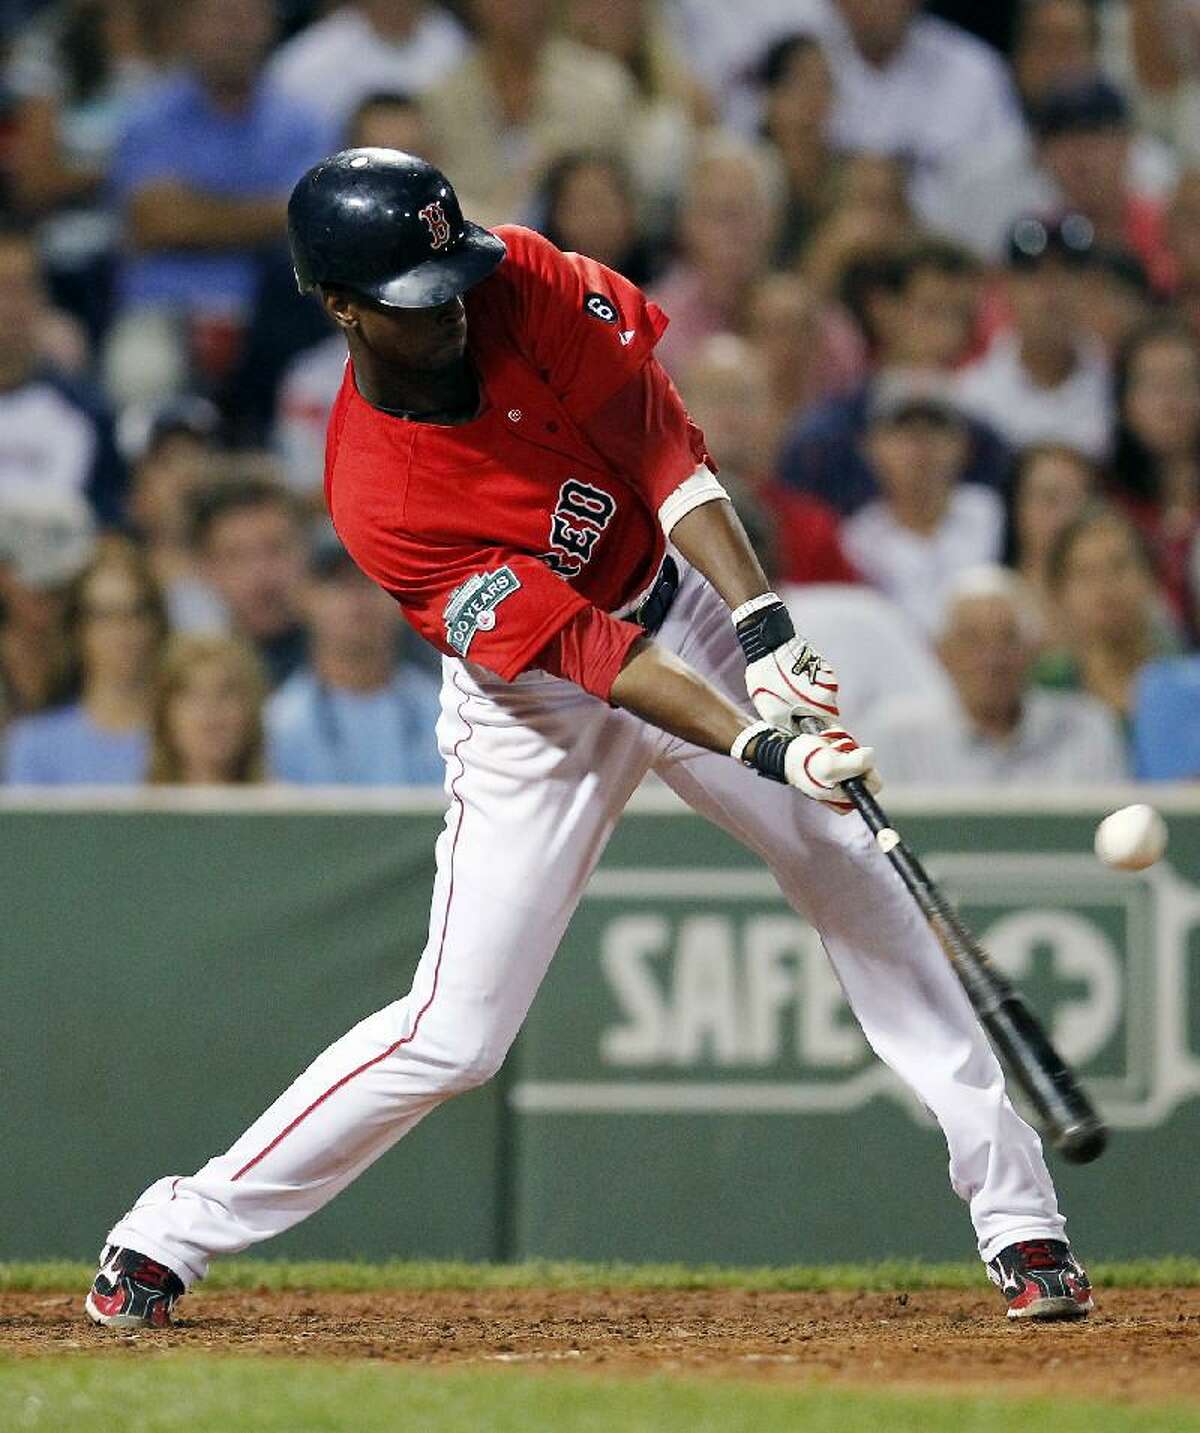 ASSOCIATED PRESS Boston Red Sox's Pedro Ciriaco hits a two-run double in the seventh inning of Friday night's game against the Kansas City Royals in Boston. The Red Sox won 4-3.